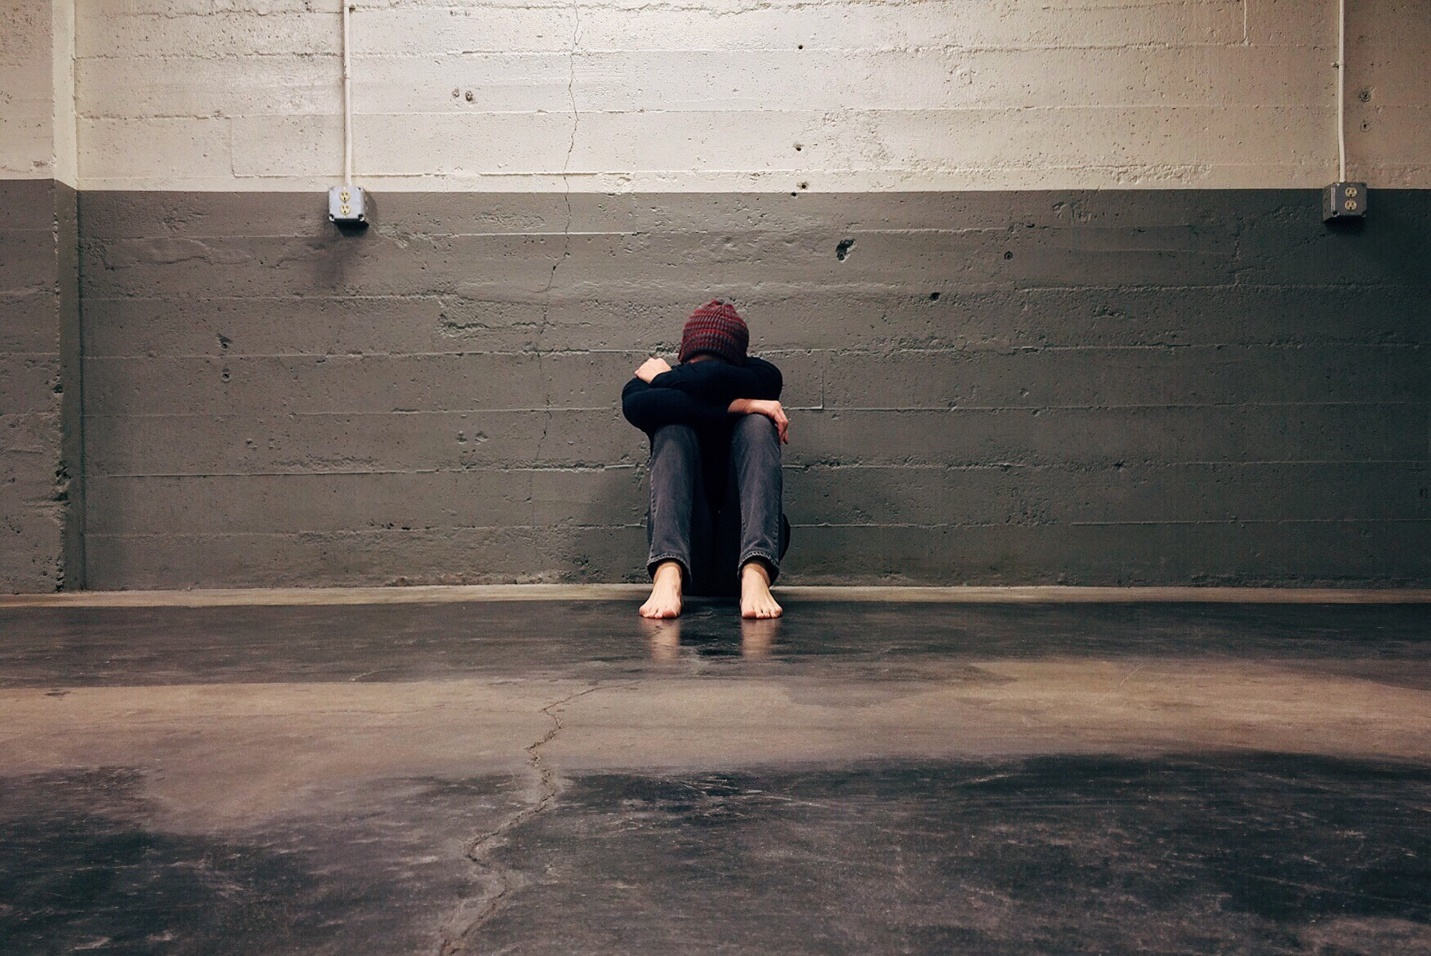 A person sitting on the floor in an empty room.